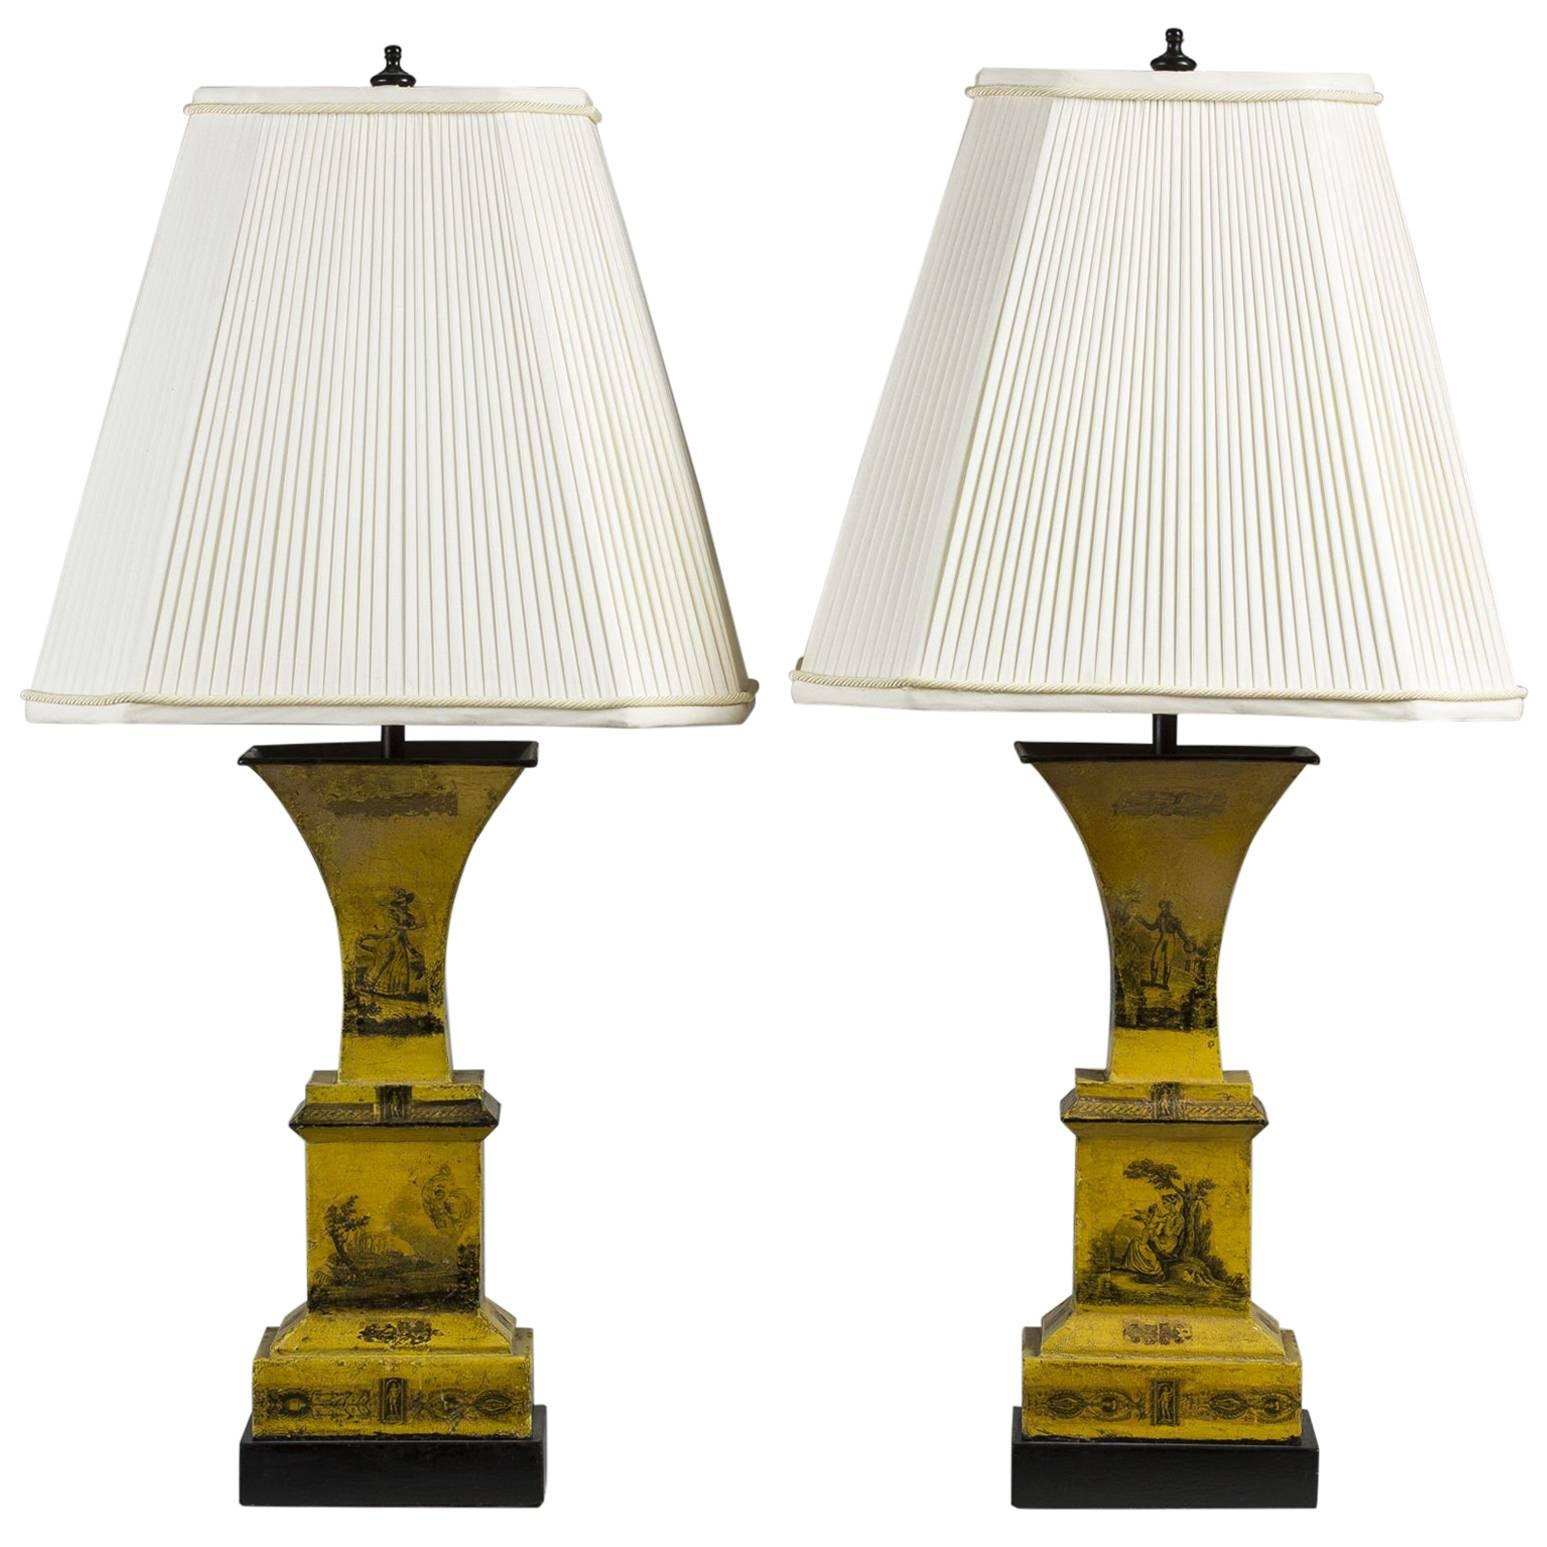 Pair of Romantic Yellow Tole Urns Mounted as Lamps